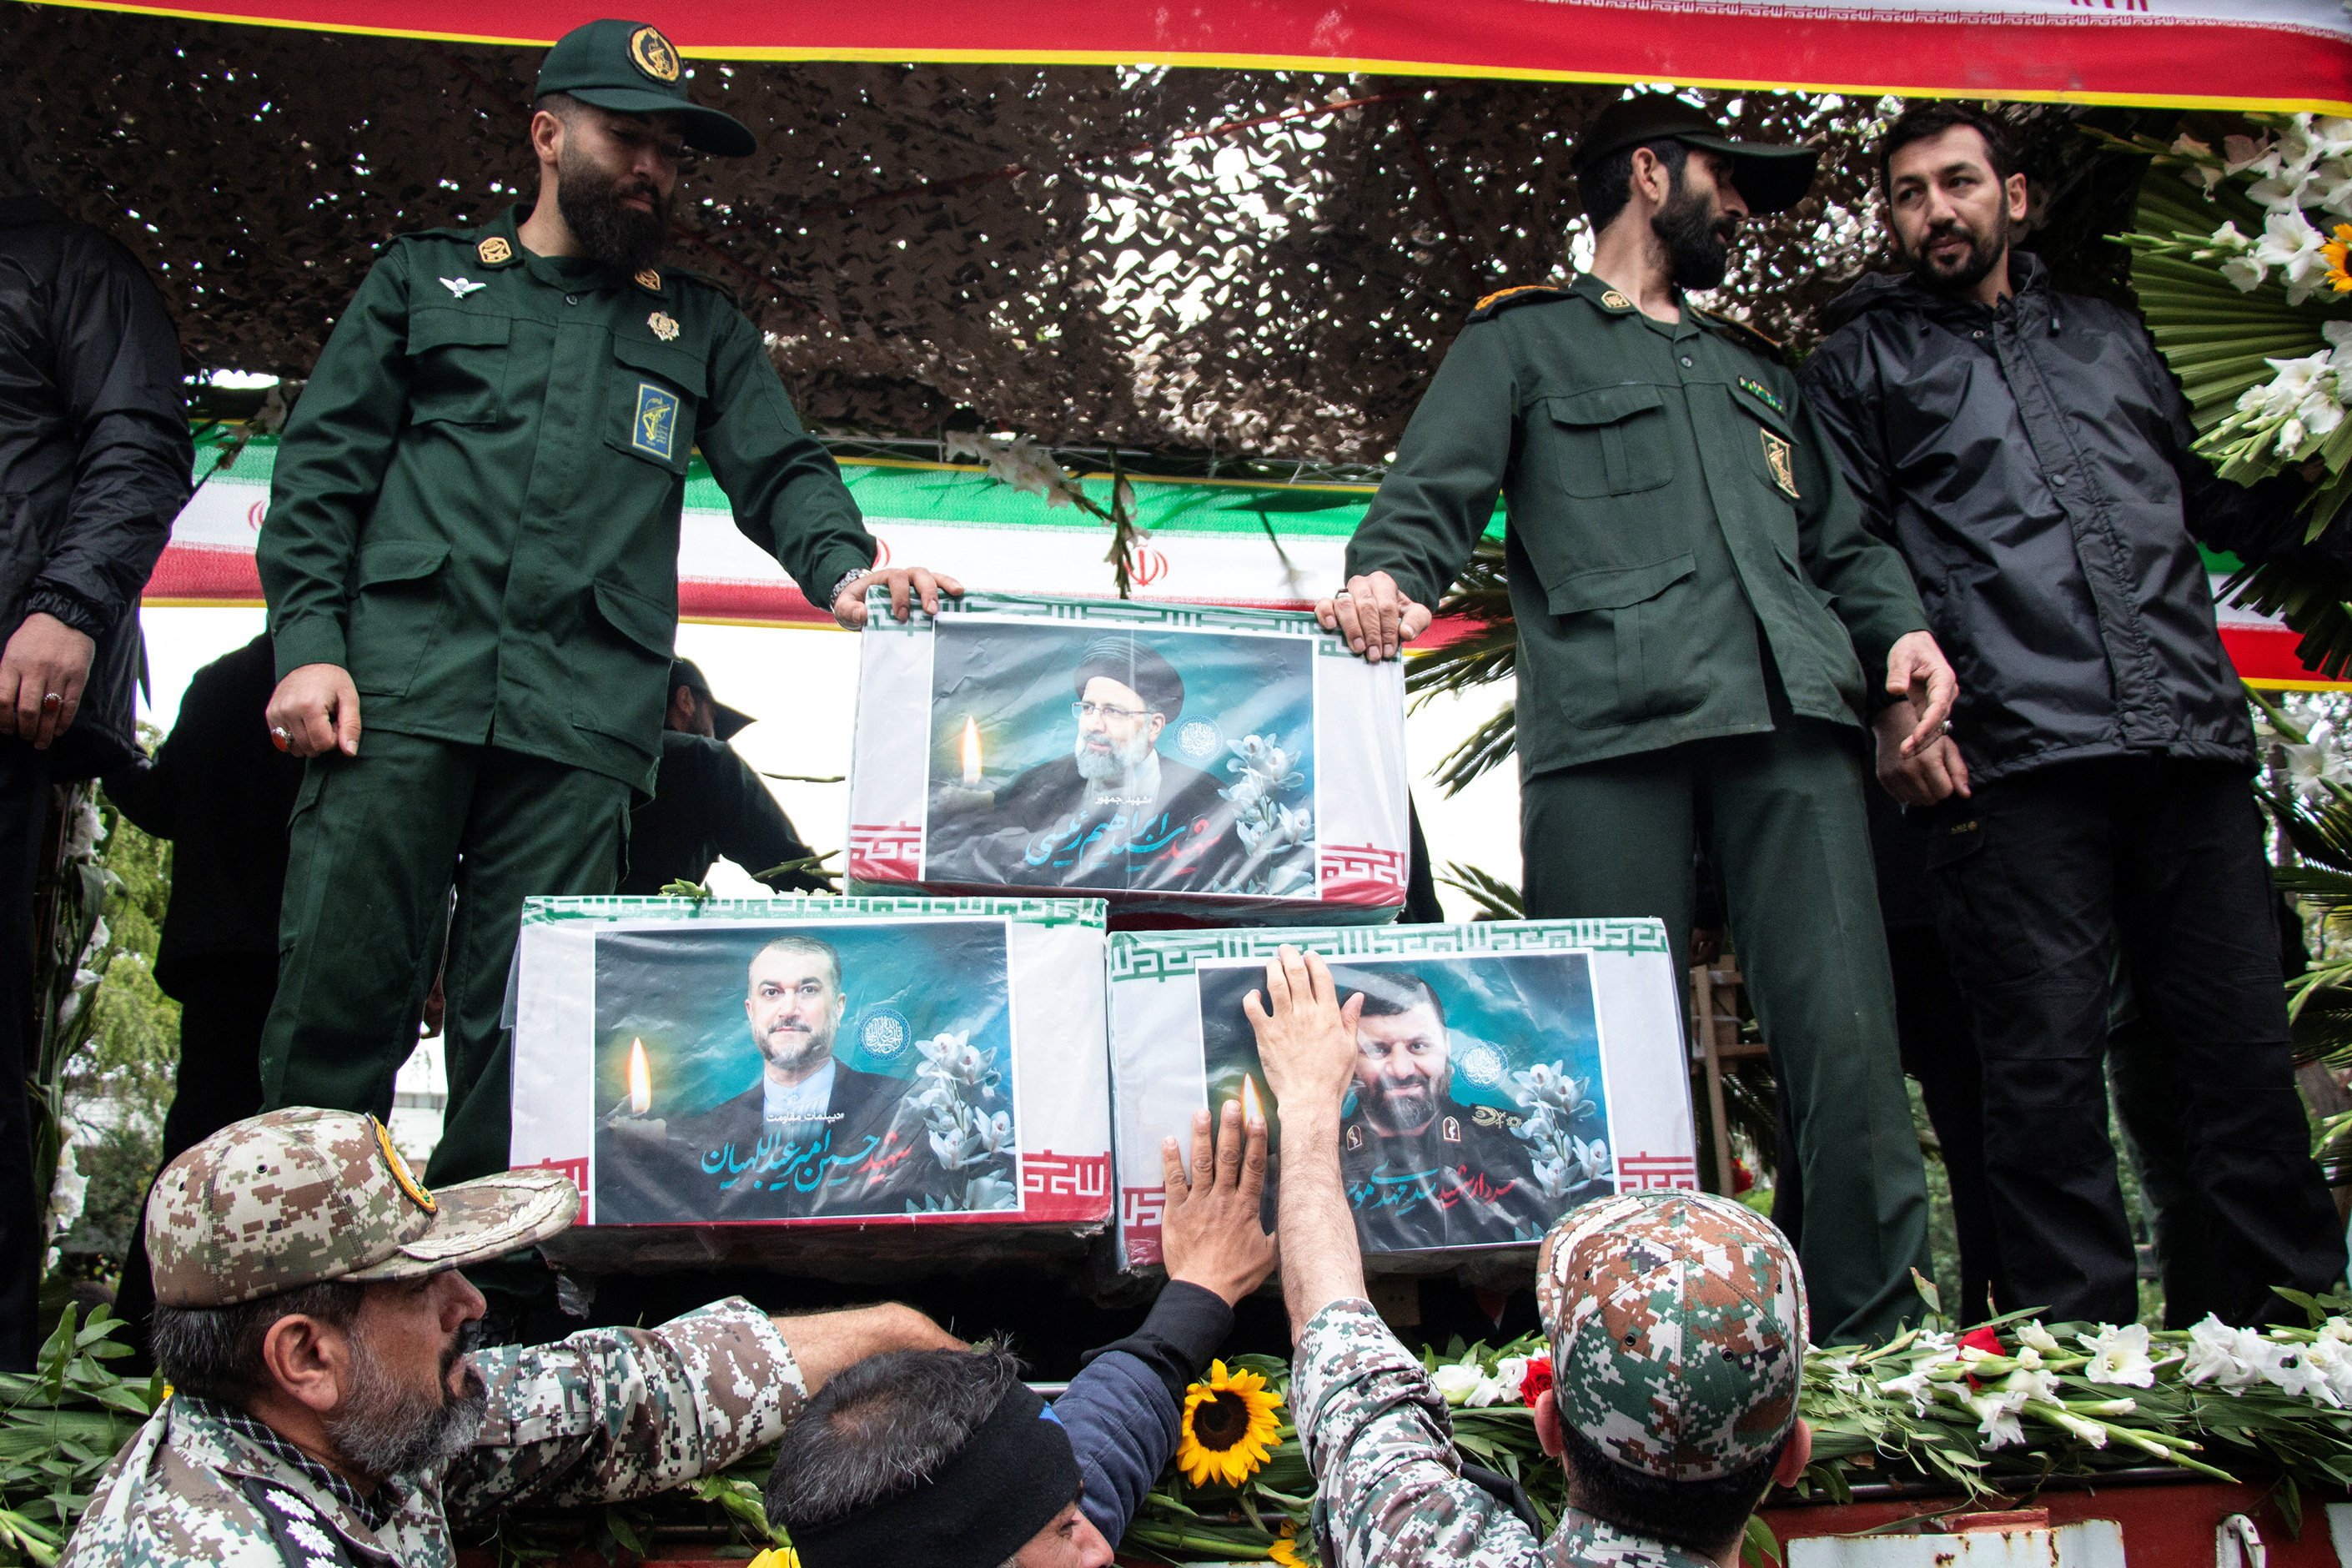 A picture of the late Iranian president Ebrahim Raisi is seen on his coffin during a funeral ceremony in Tabriz, Iran. Photo: West Asia News Agency via Reuters